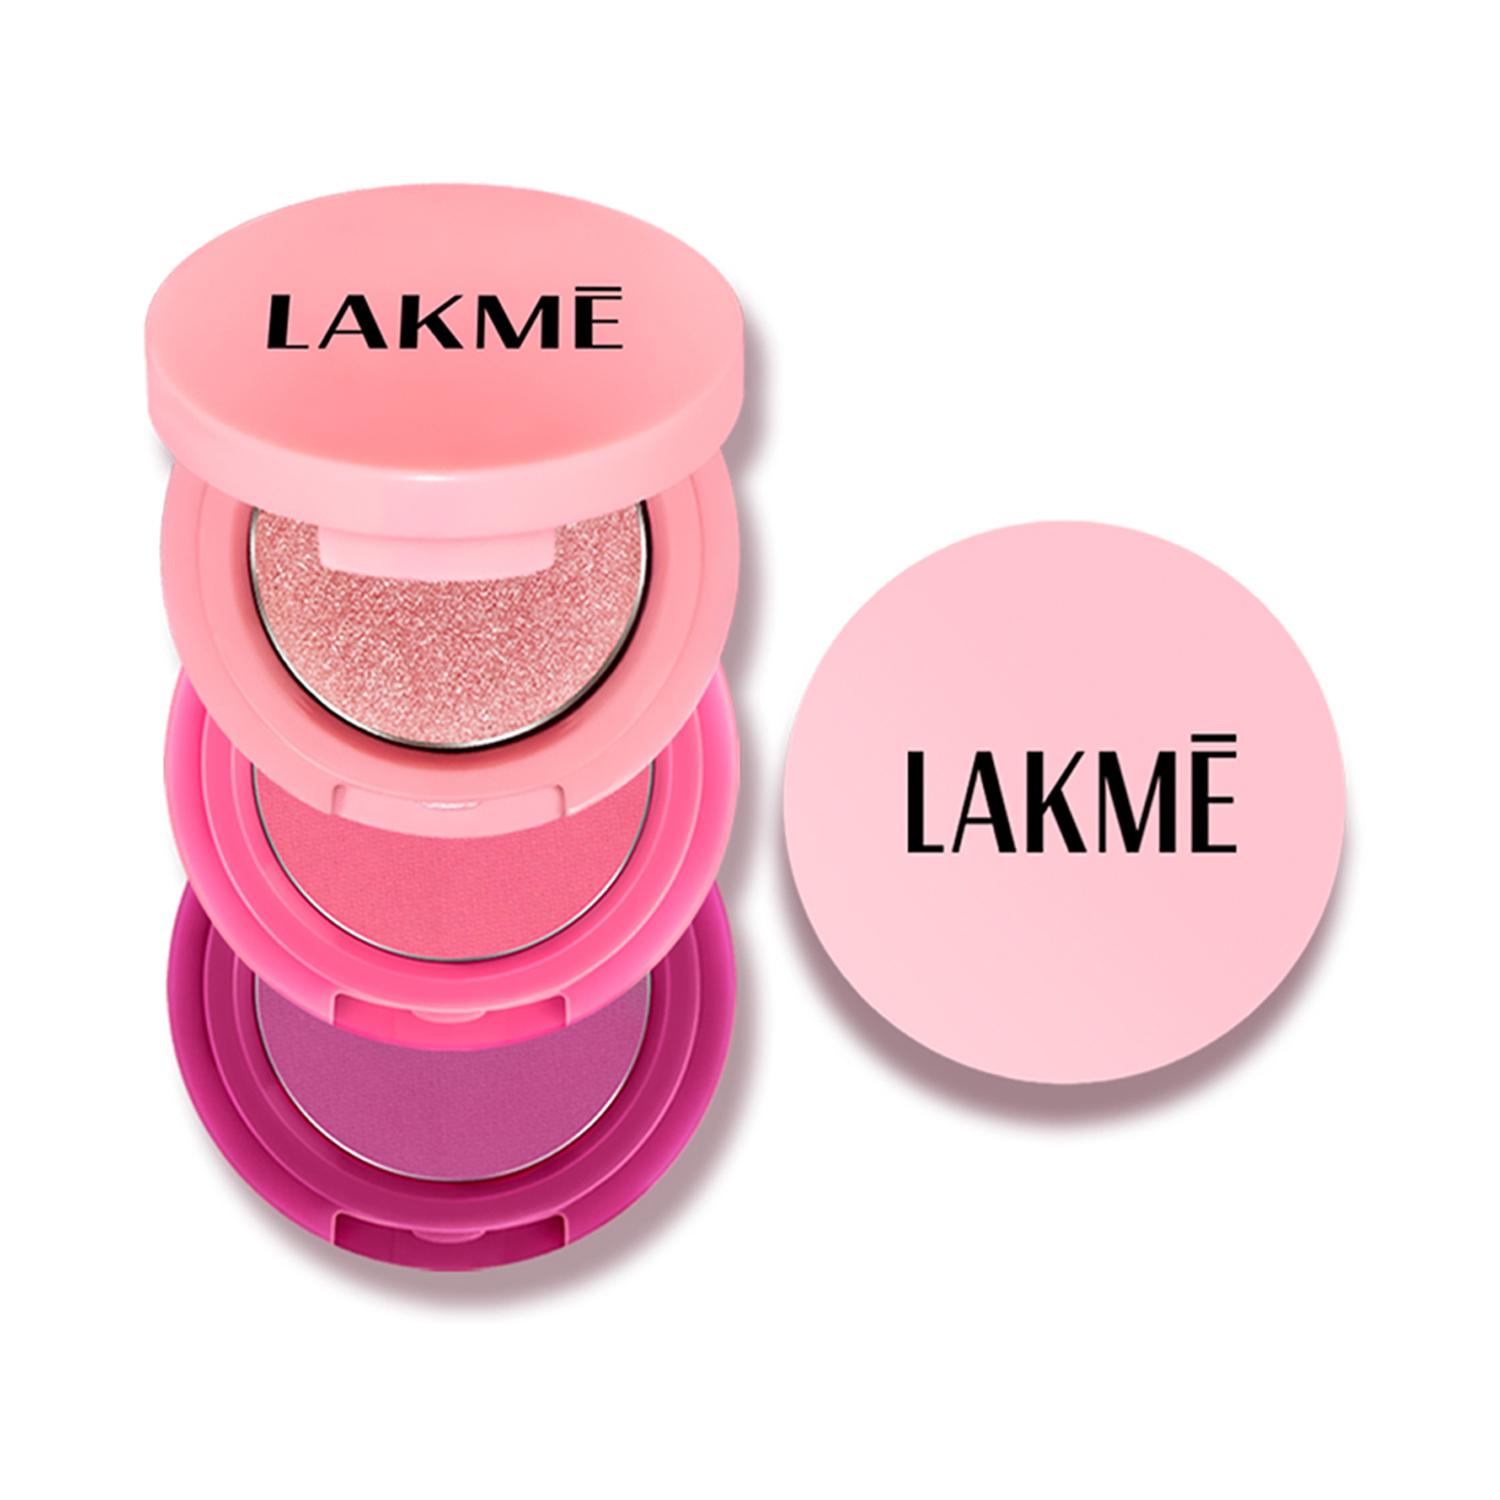 Lakme | Lakme 9to5 Eyeconic Shadow Stack - PinkBeauty (7g)